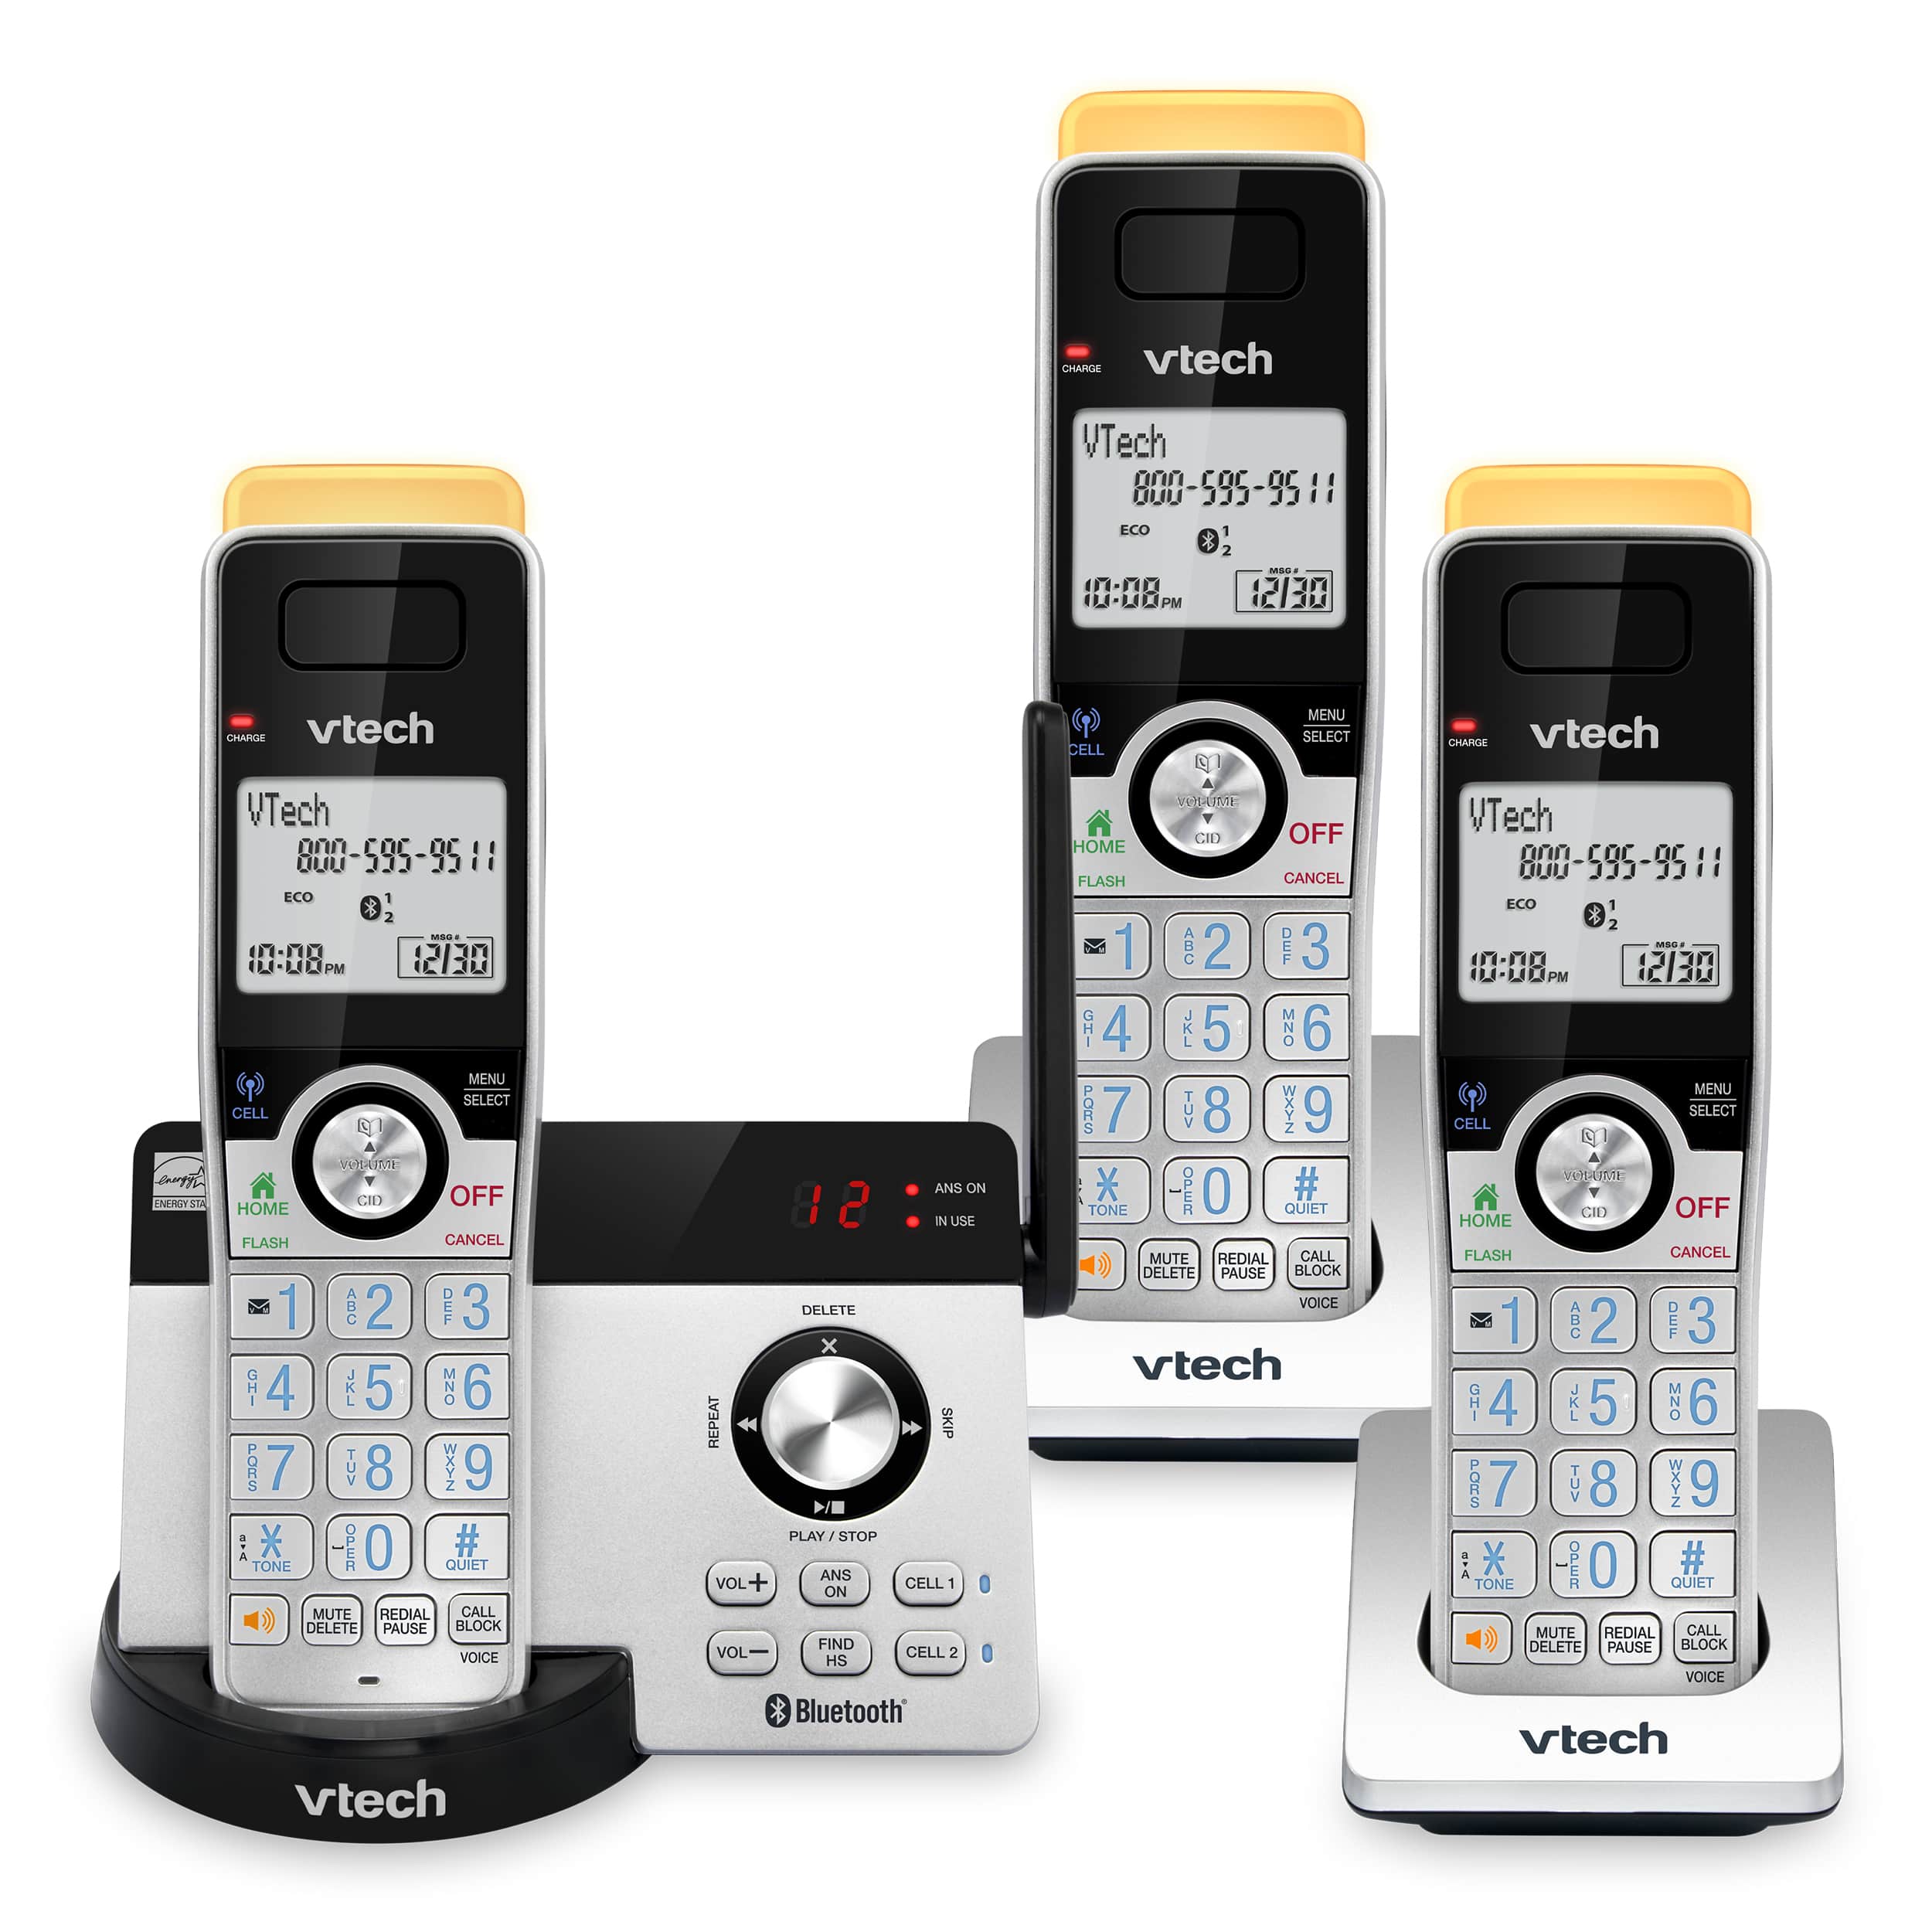 3-Handset Expandable Cordless Phone with Super Long Range, Bluetooth Connect to Cell, Smart Call Blocker and Answering System - view 1